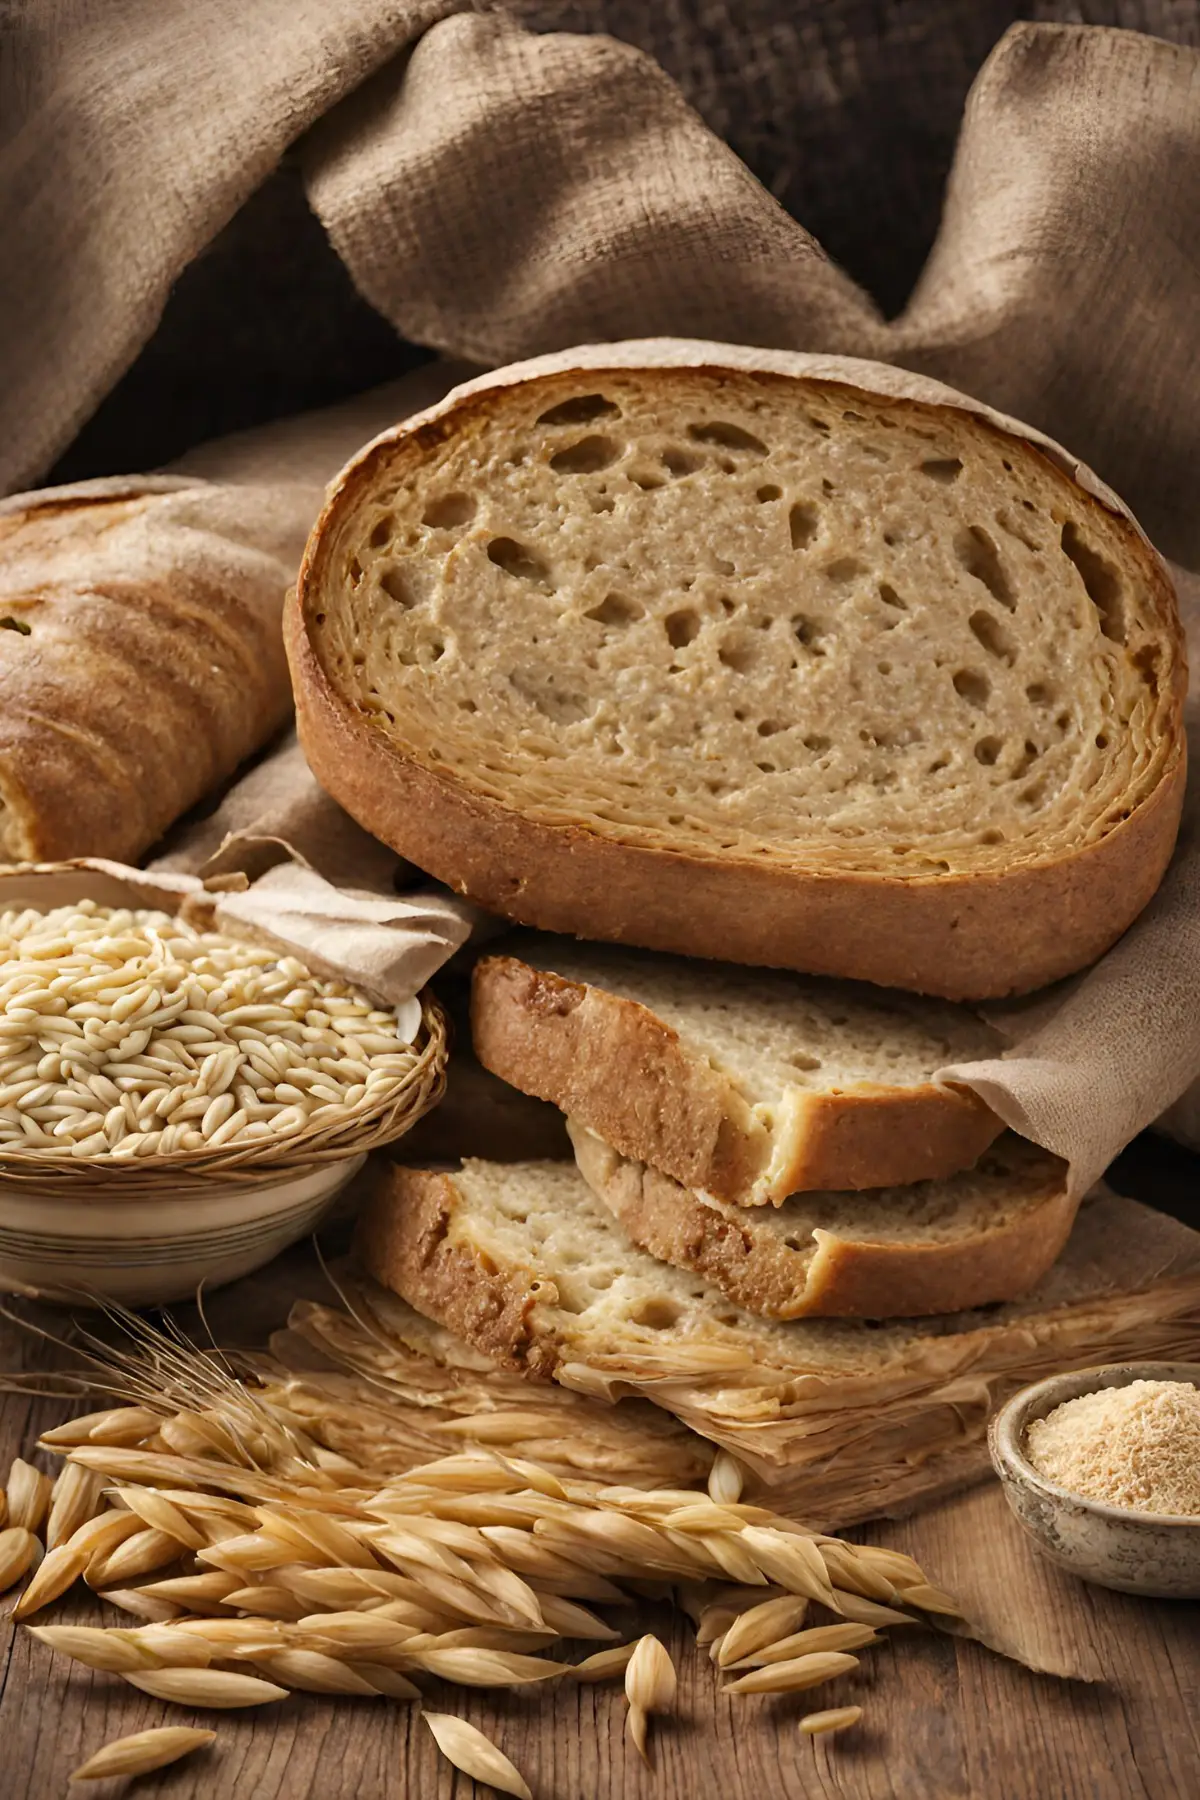 The Halal Certification Process for Gluten-Containing Foods